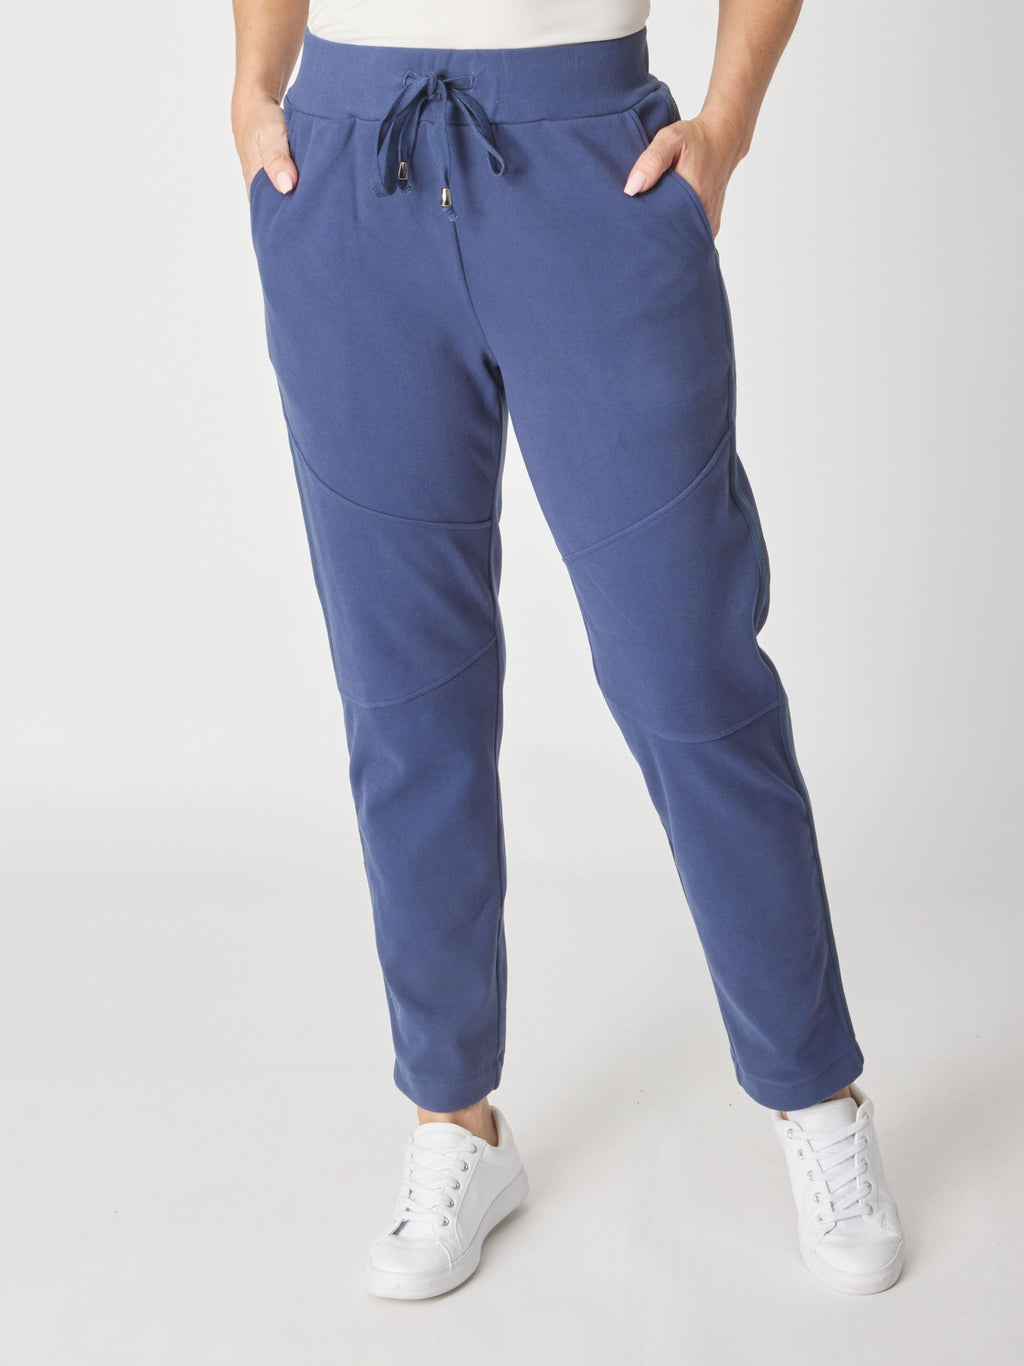 Buy Cotton Drawstring Pants Online in New Zealand